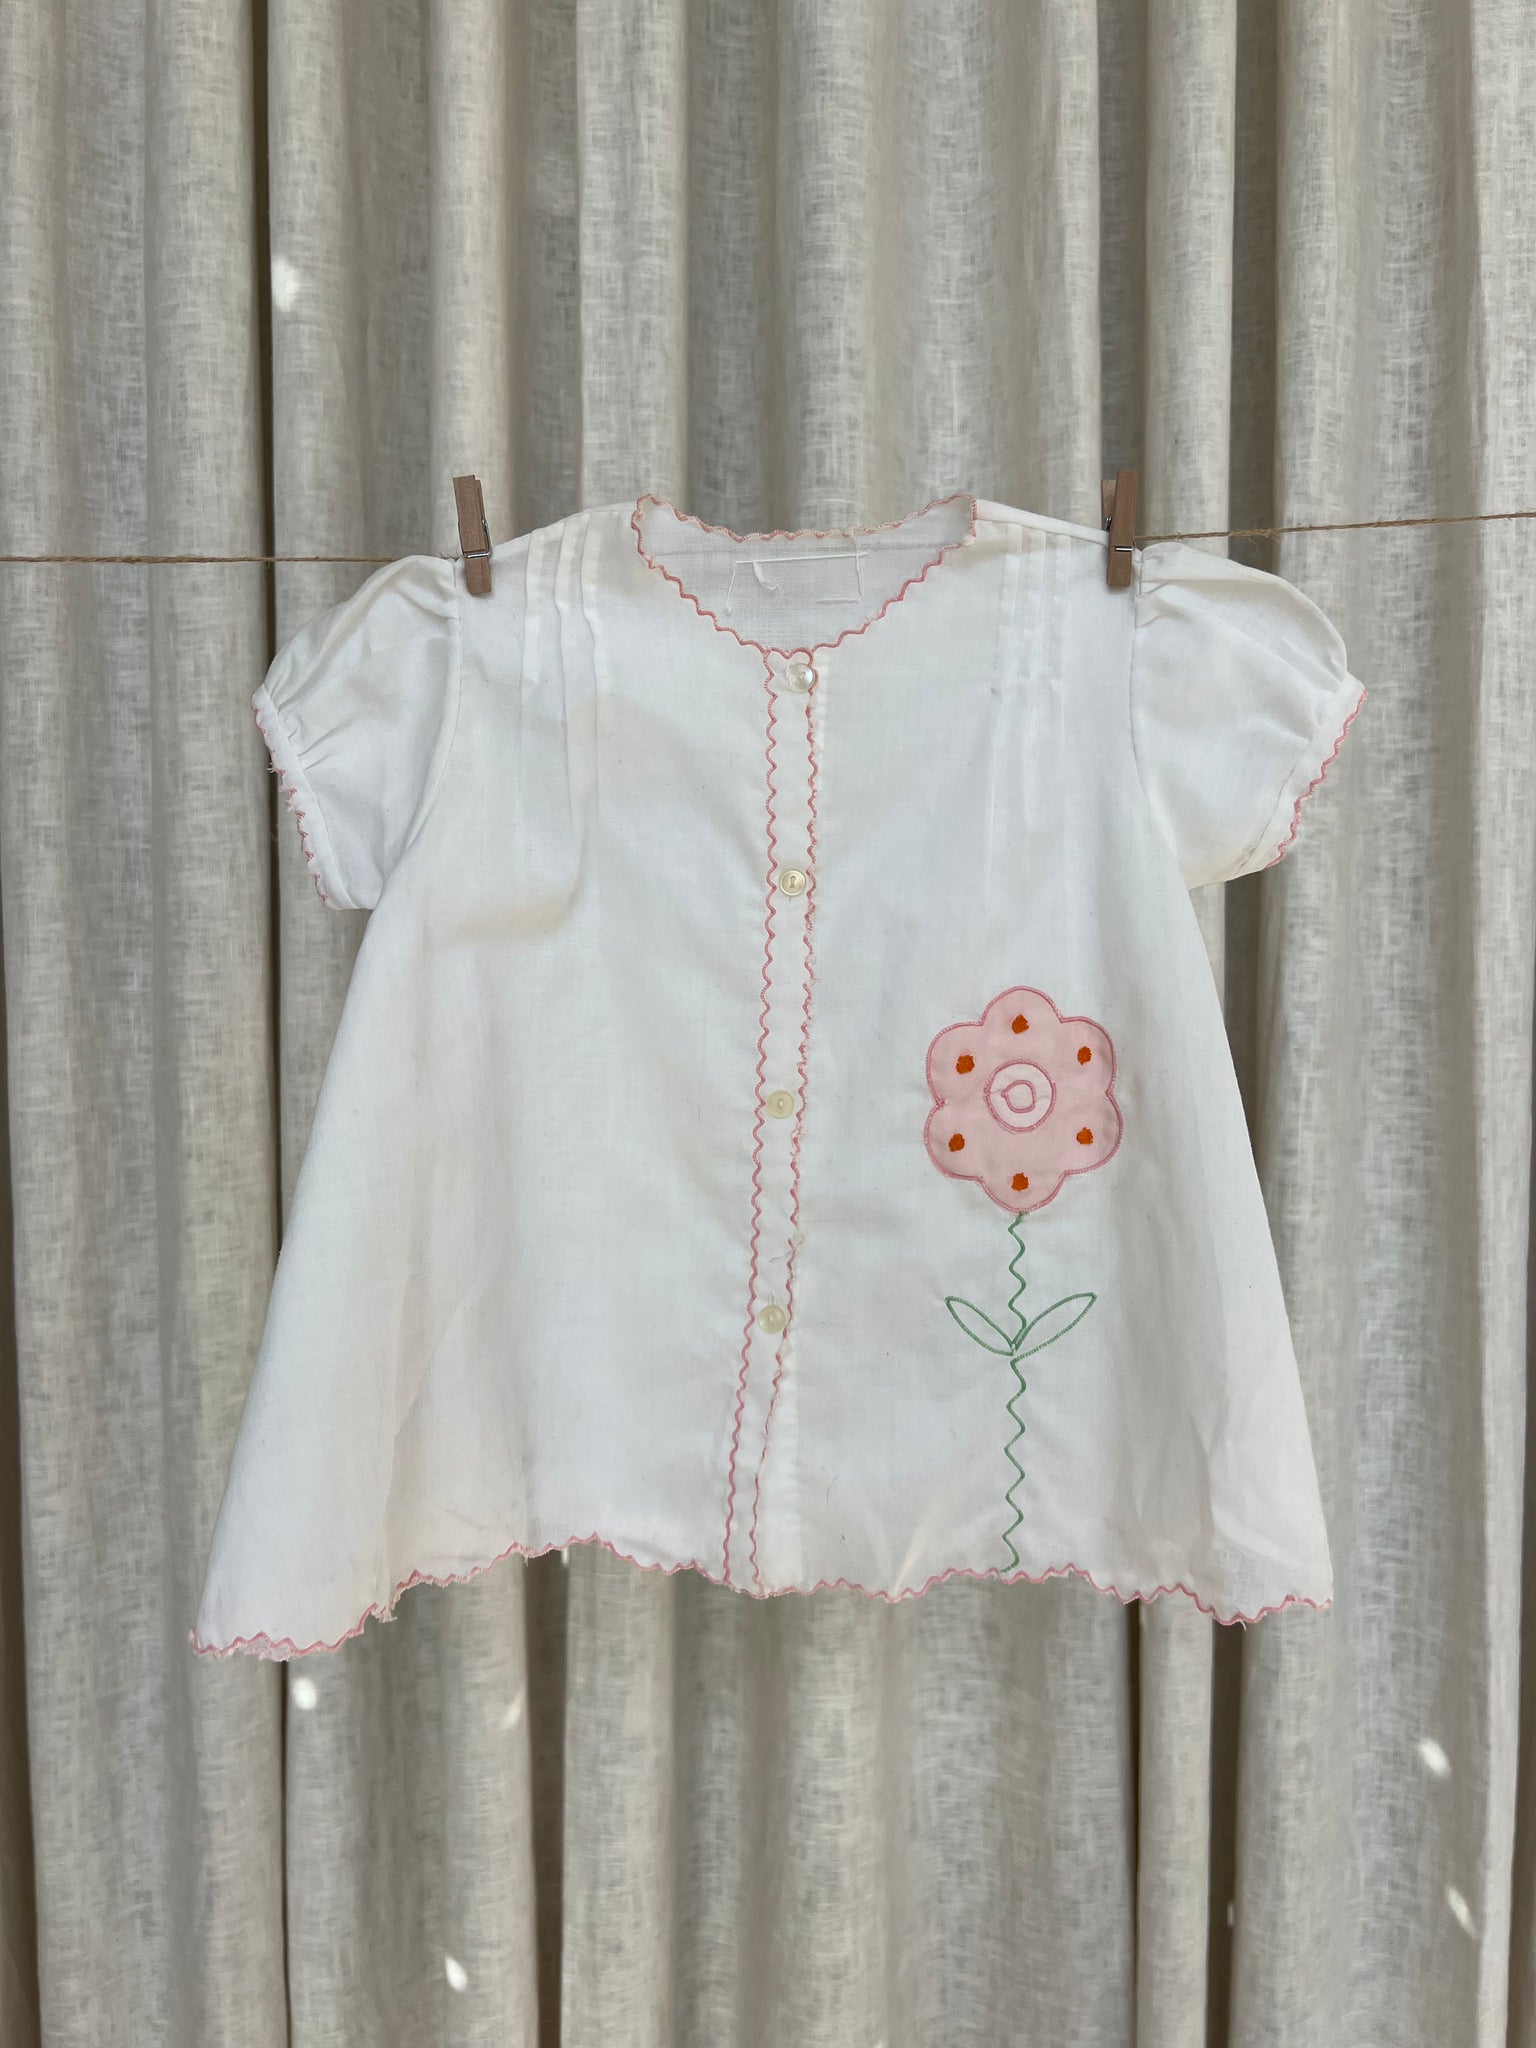 EMBROIDERED DAISY BABY DRESS